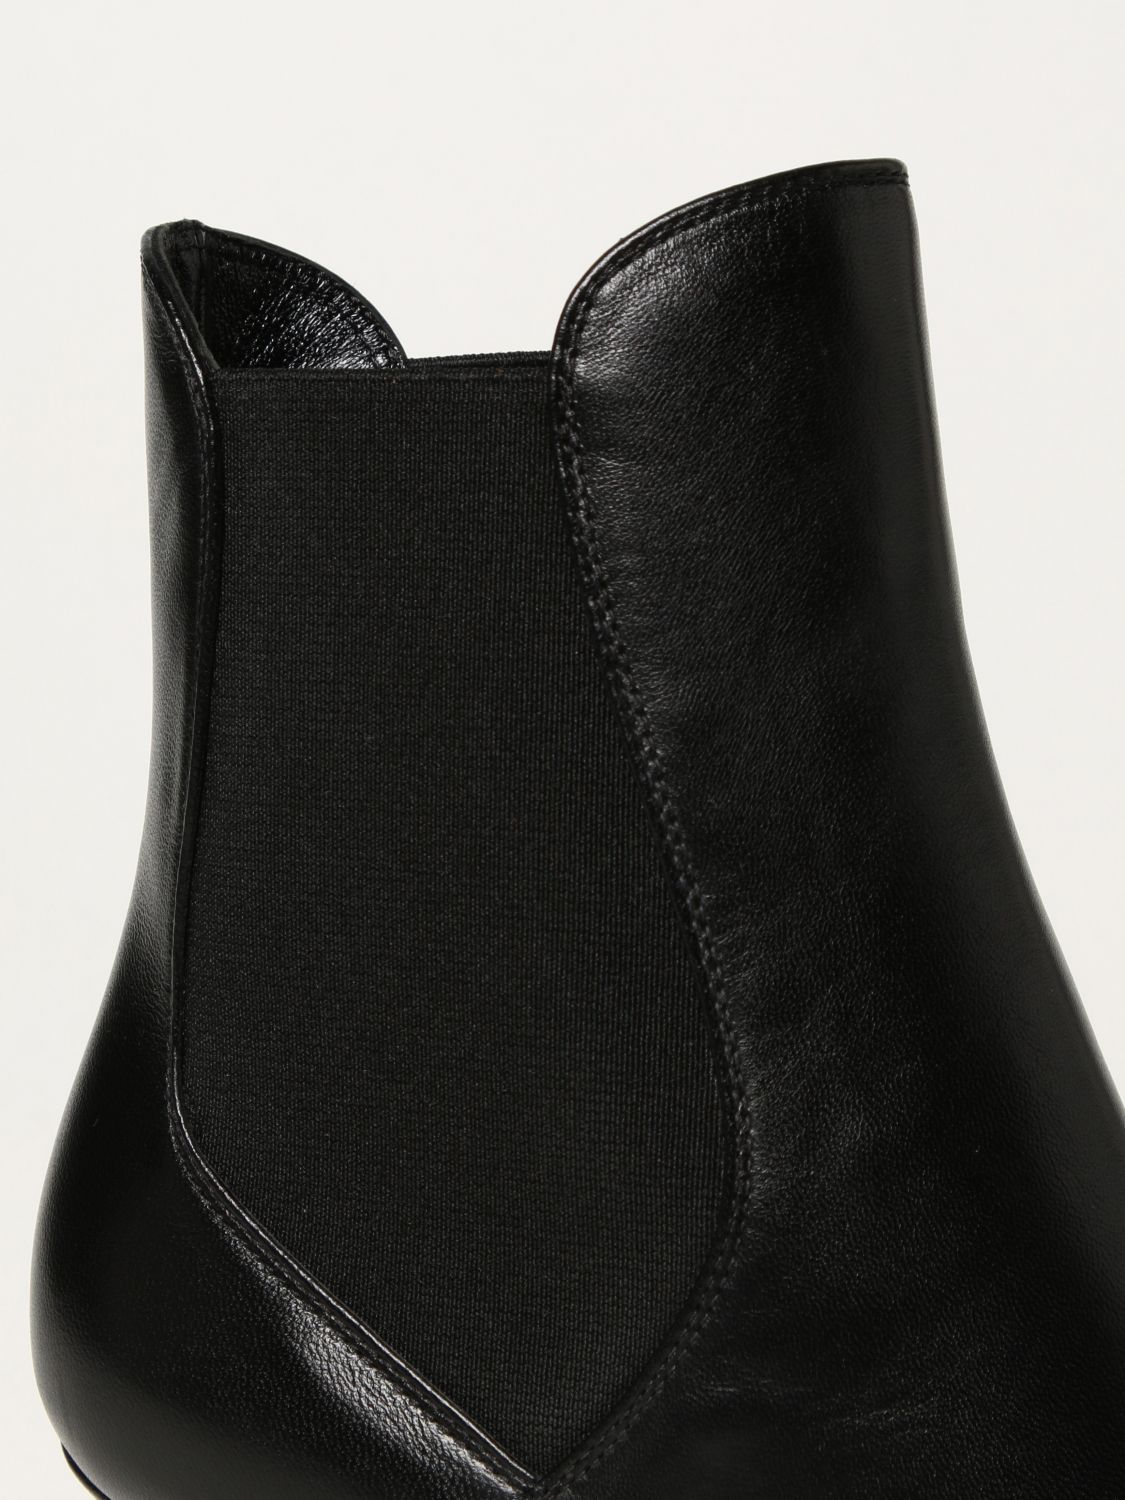 Heeled ankle boots Sergio Rossi: Sergio Rossi heeled ankle boots for women black 4